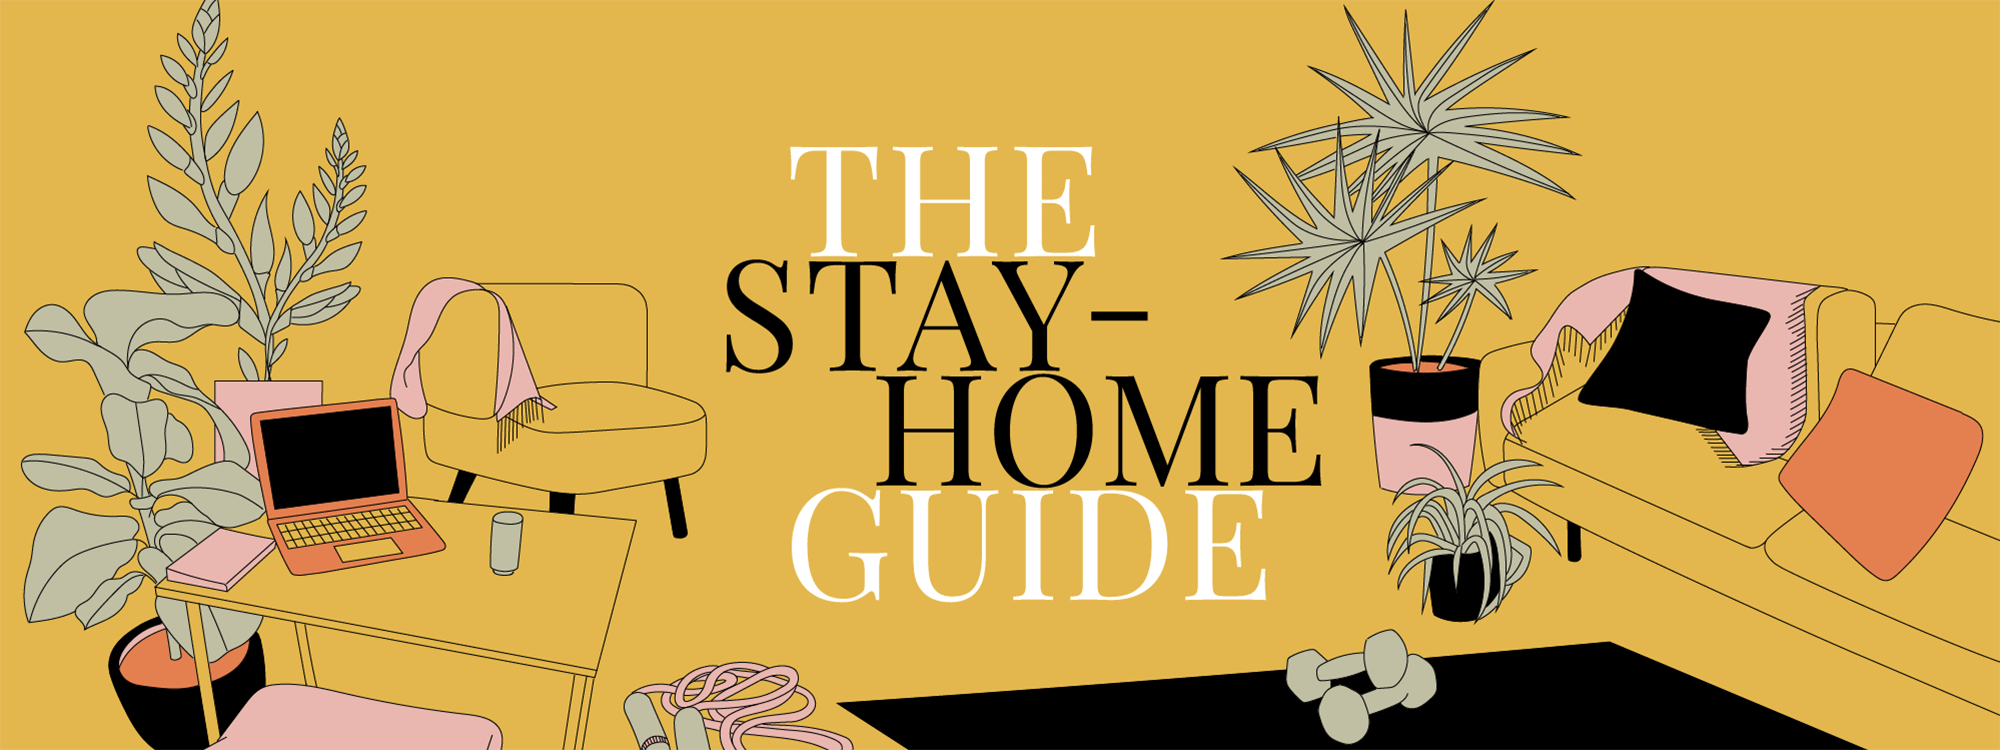 The Stay-Home Guide hero image.